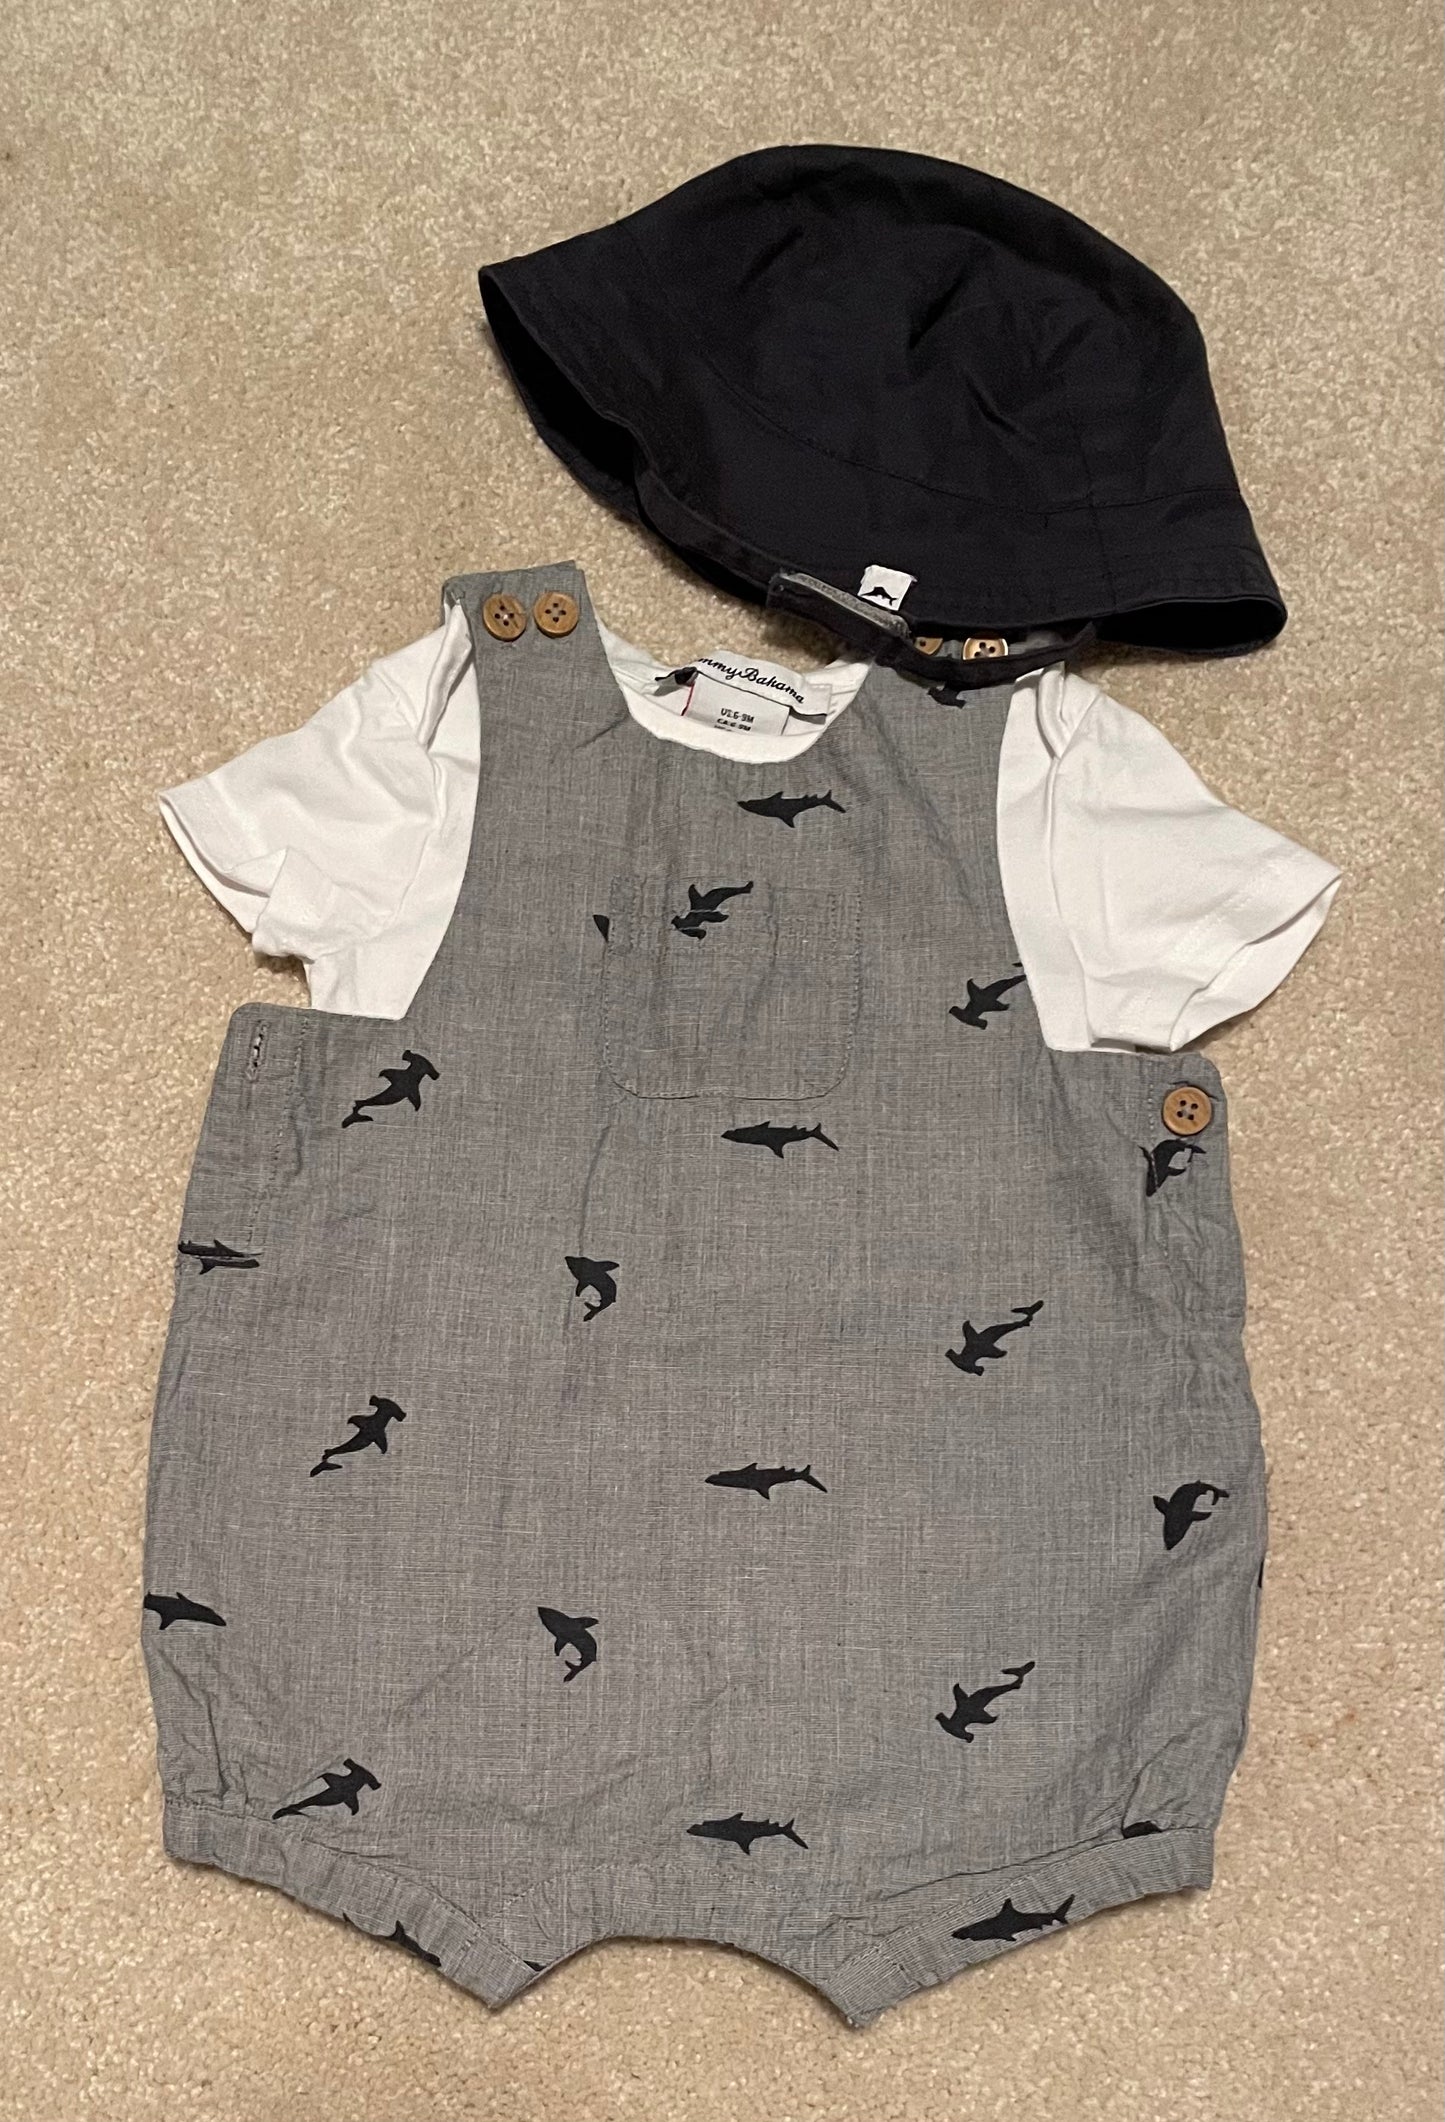 Tommy Bahama Boys 3 piece outfit 6-9M